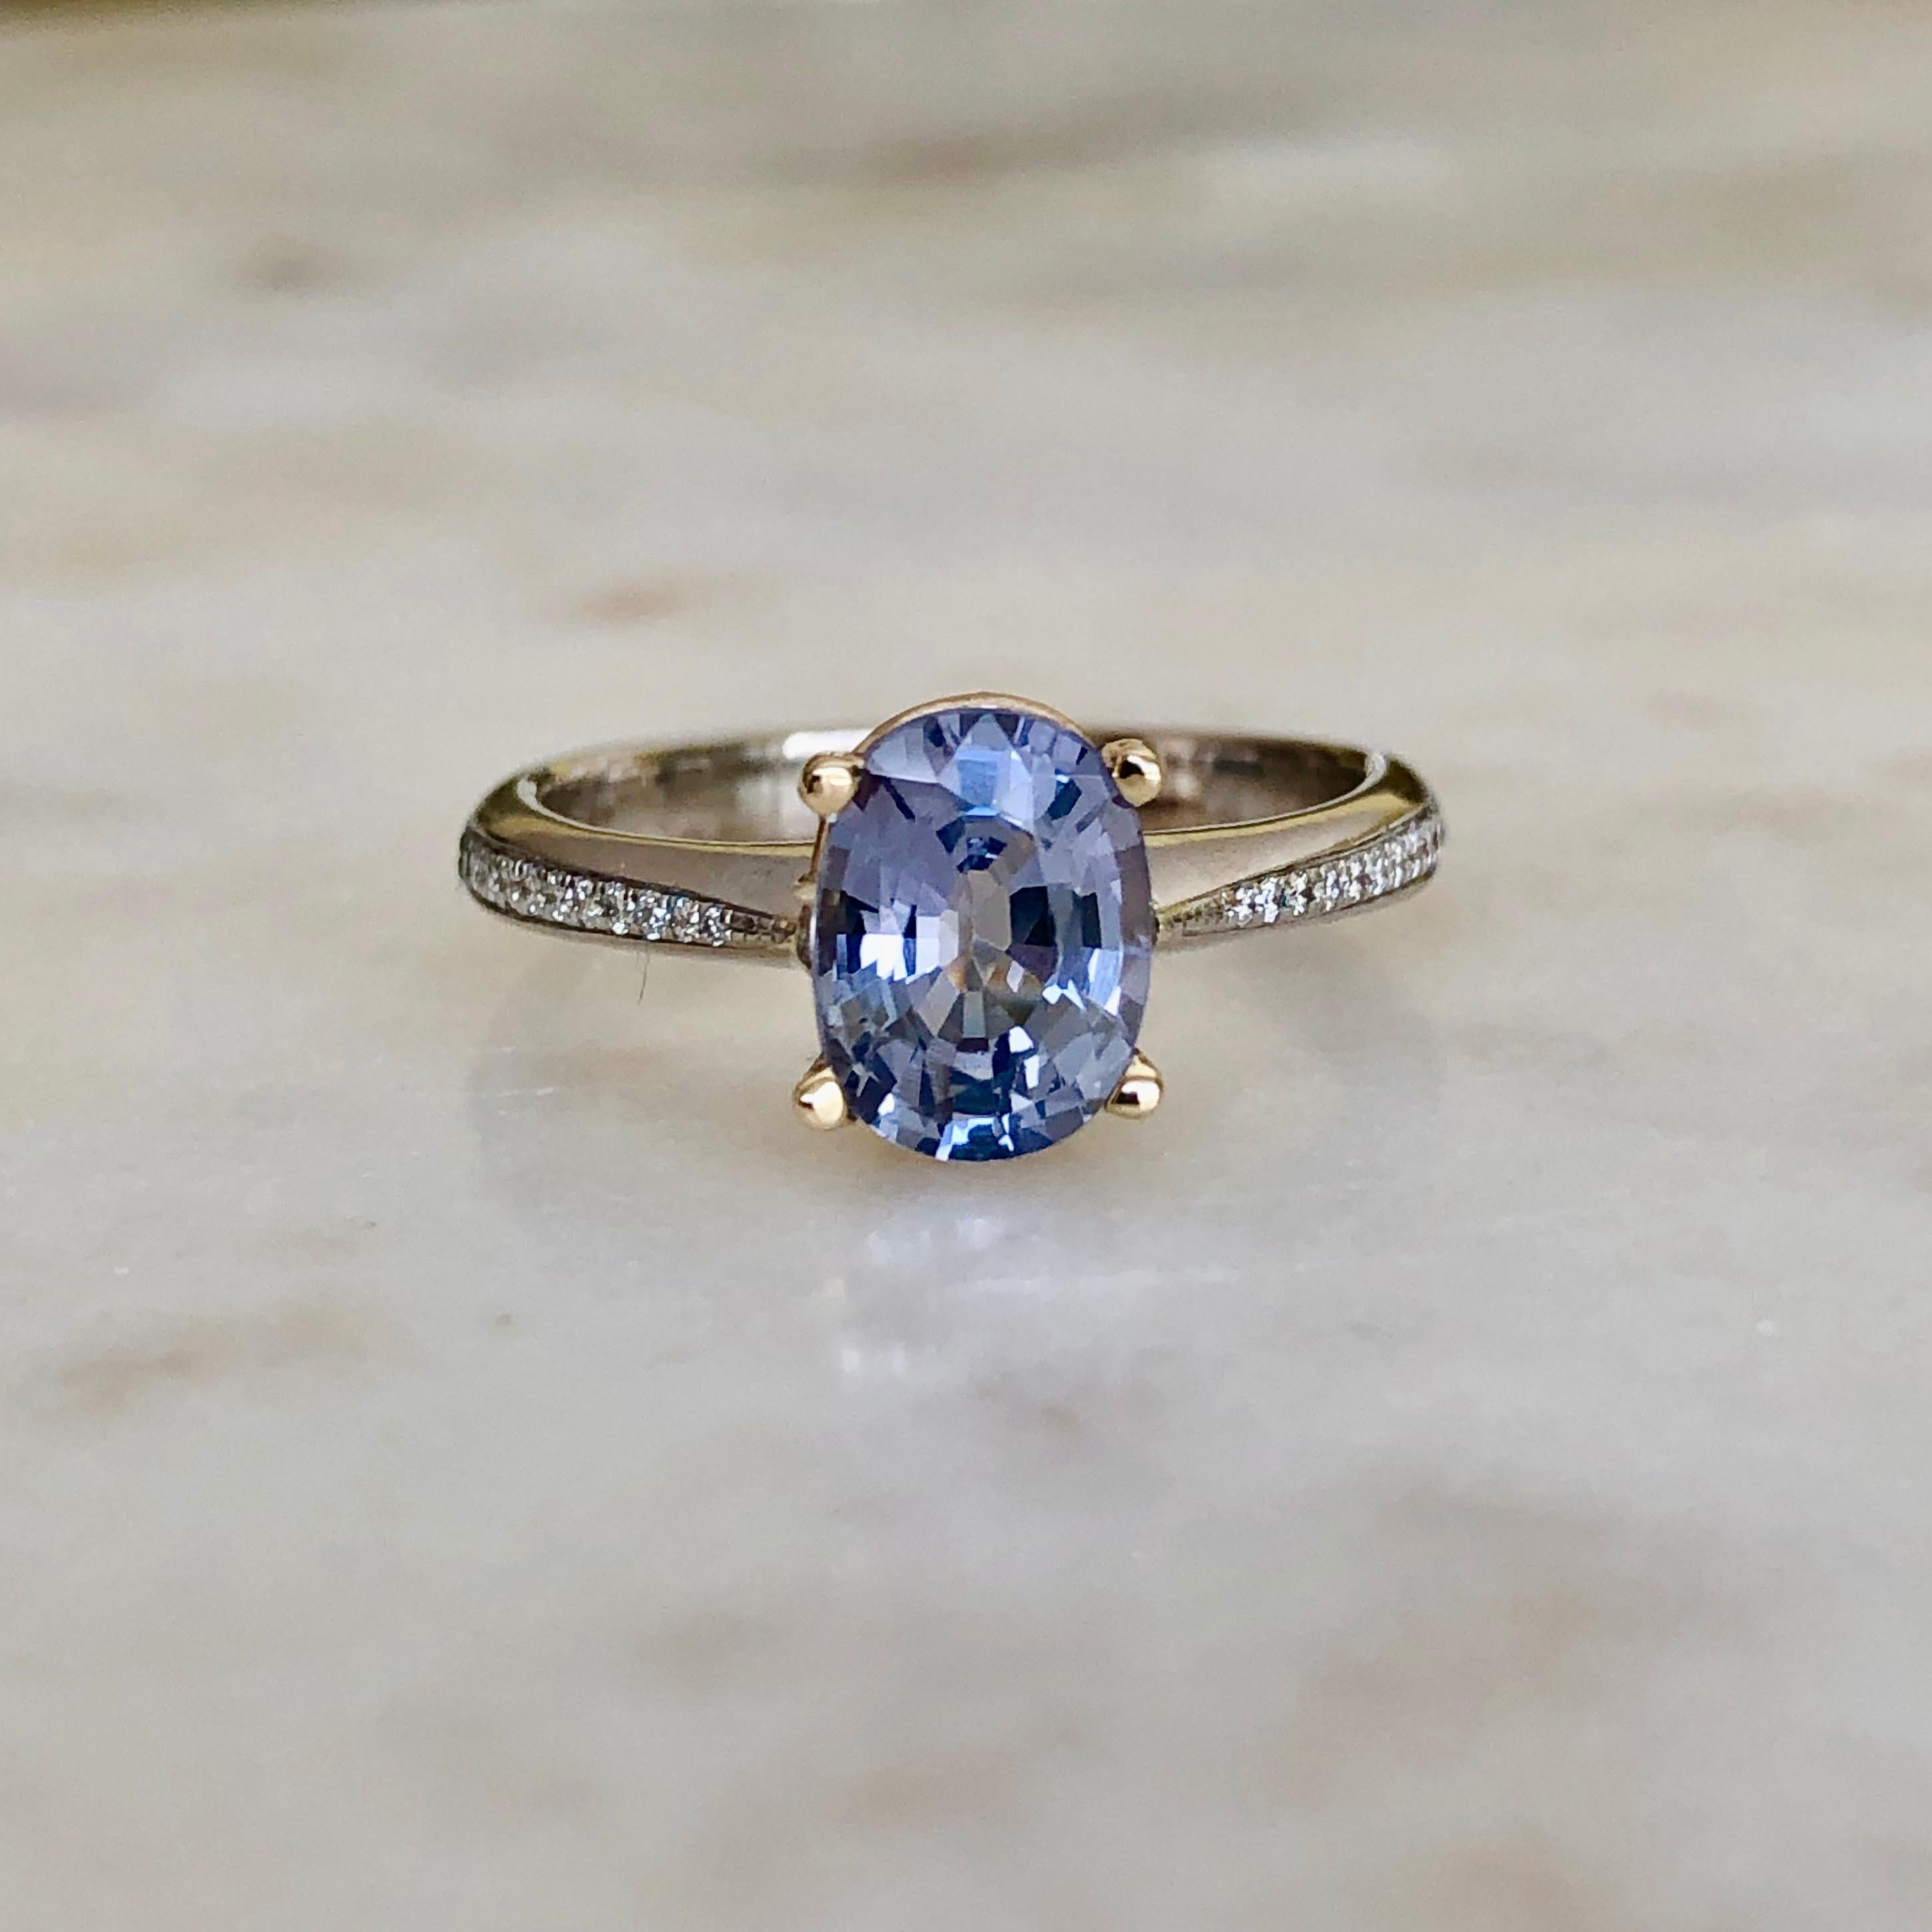 Shimmering Natural 1.34 carats natural medium Lilac sapphire, VS clarity,  18K Yellow gold head & white gold shank / Diamond accent approx. 0.16ct G-VS. This gorgeous engagement ring weighs approx. 4g. 
Comments: New Condition
It’s time to turn your